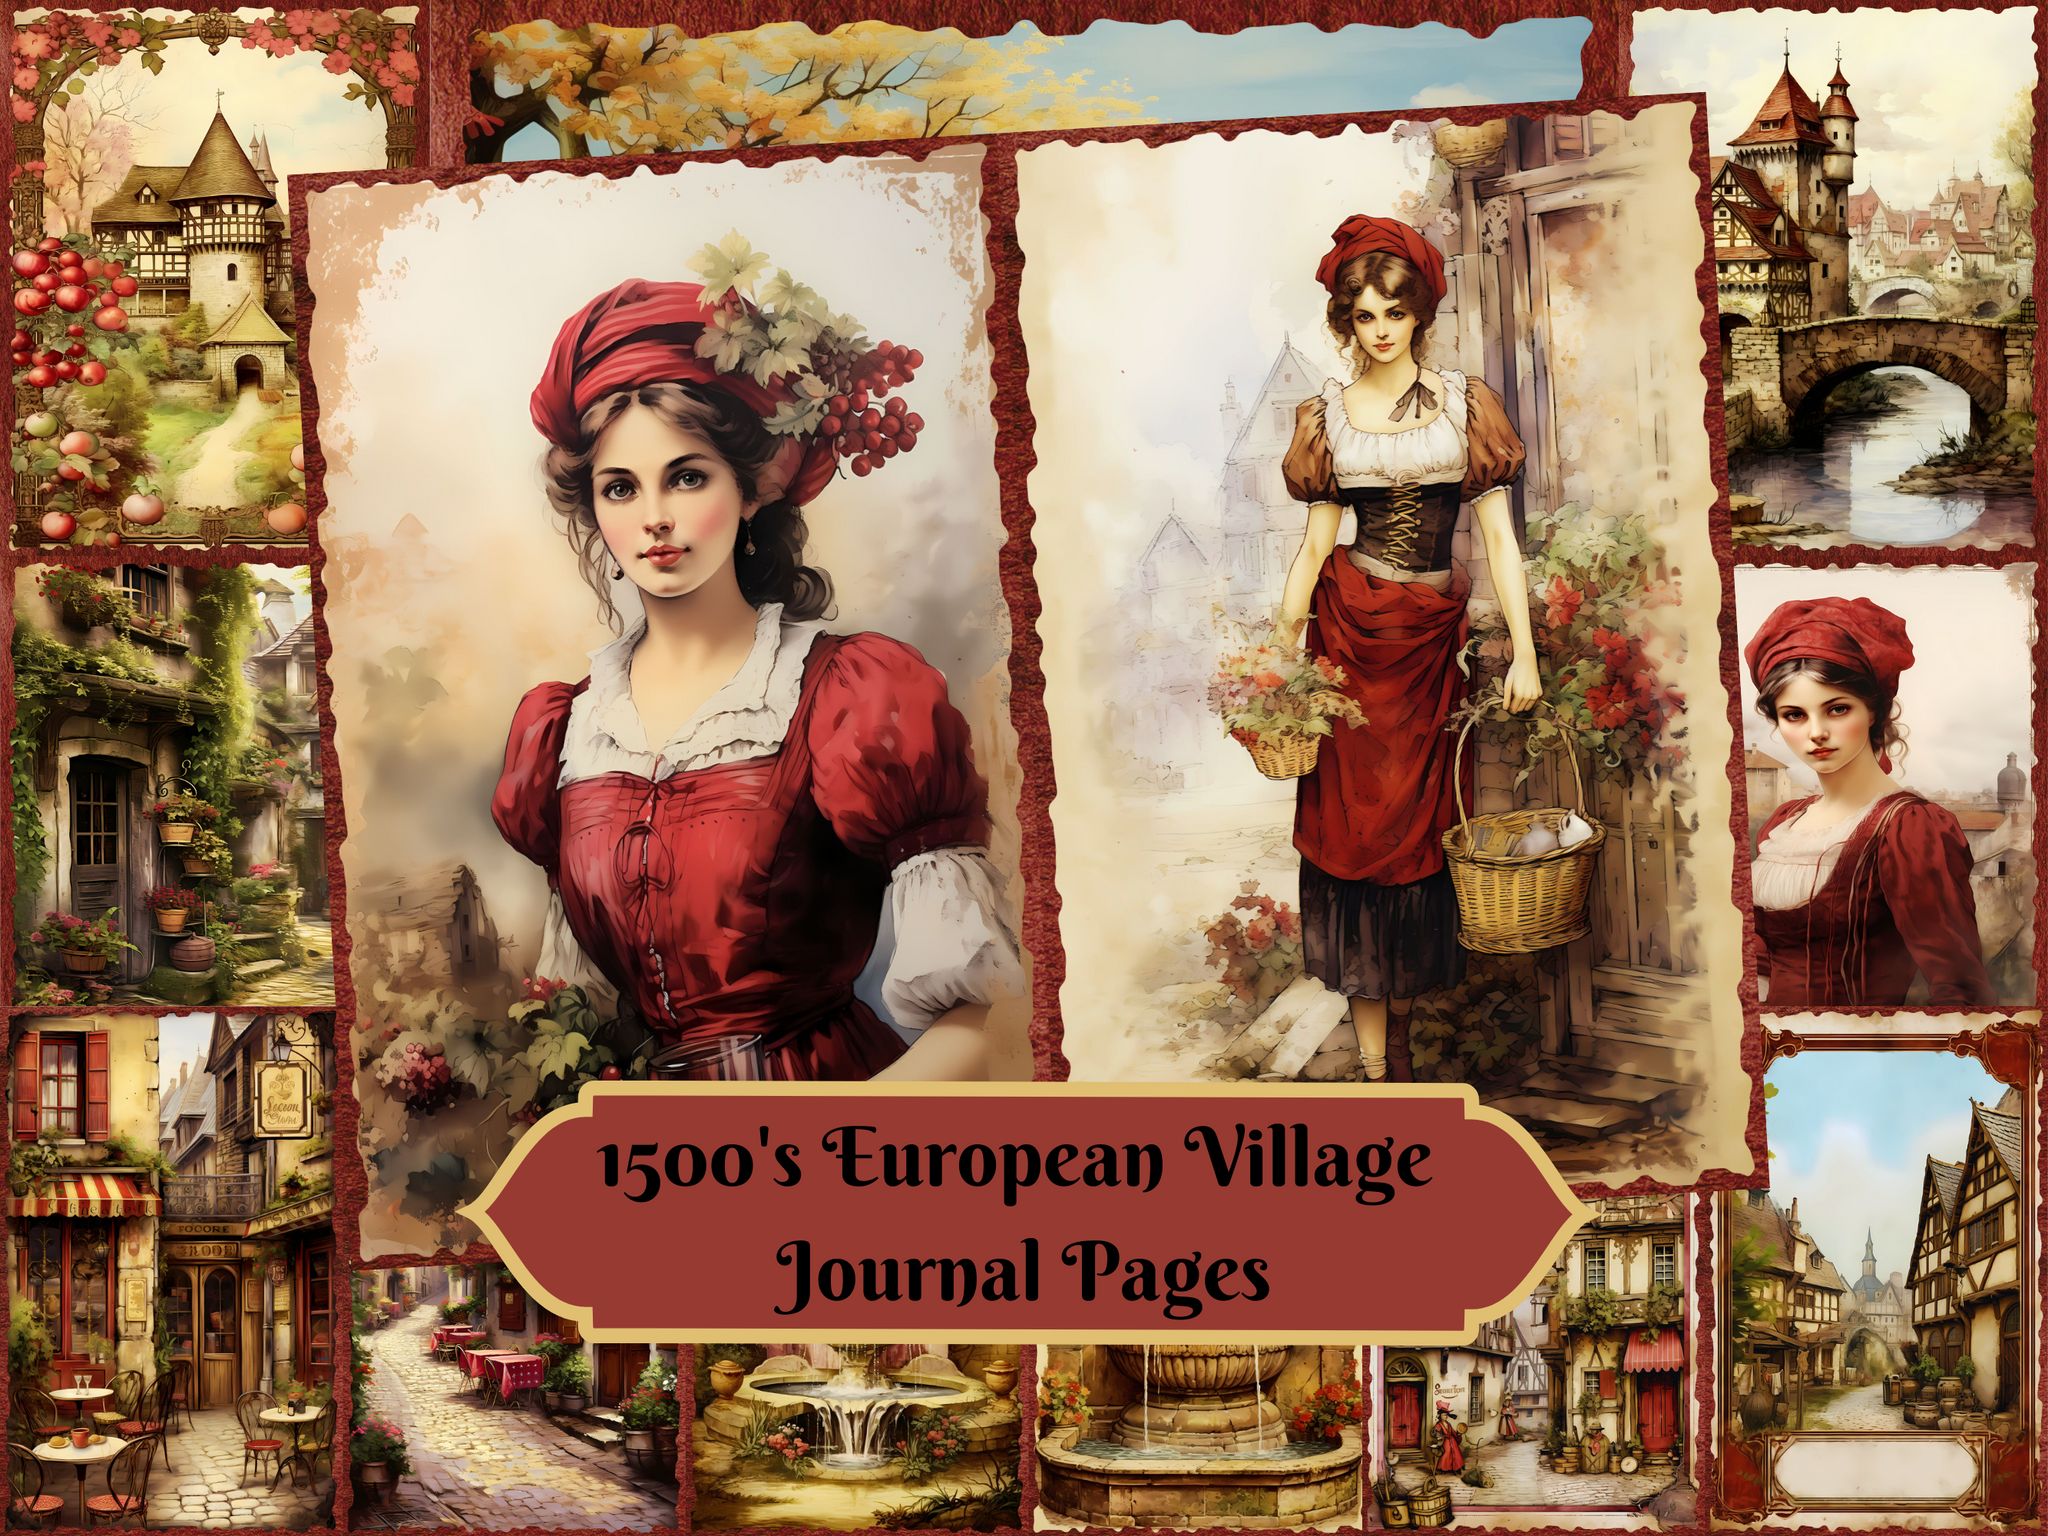 Rustic 1500's European Village-Printable Junk Journal Pages, Journal Cards, ATC Cards, Digital Download